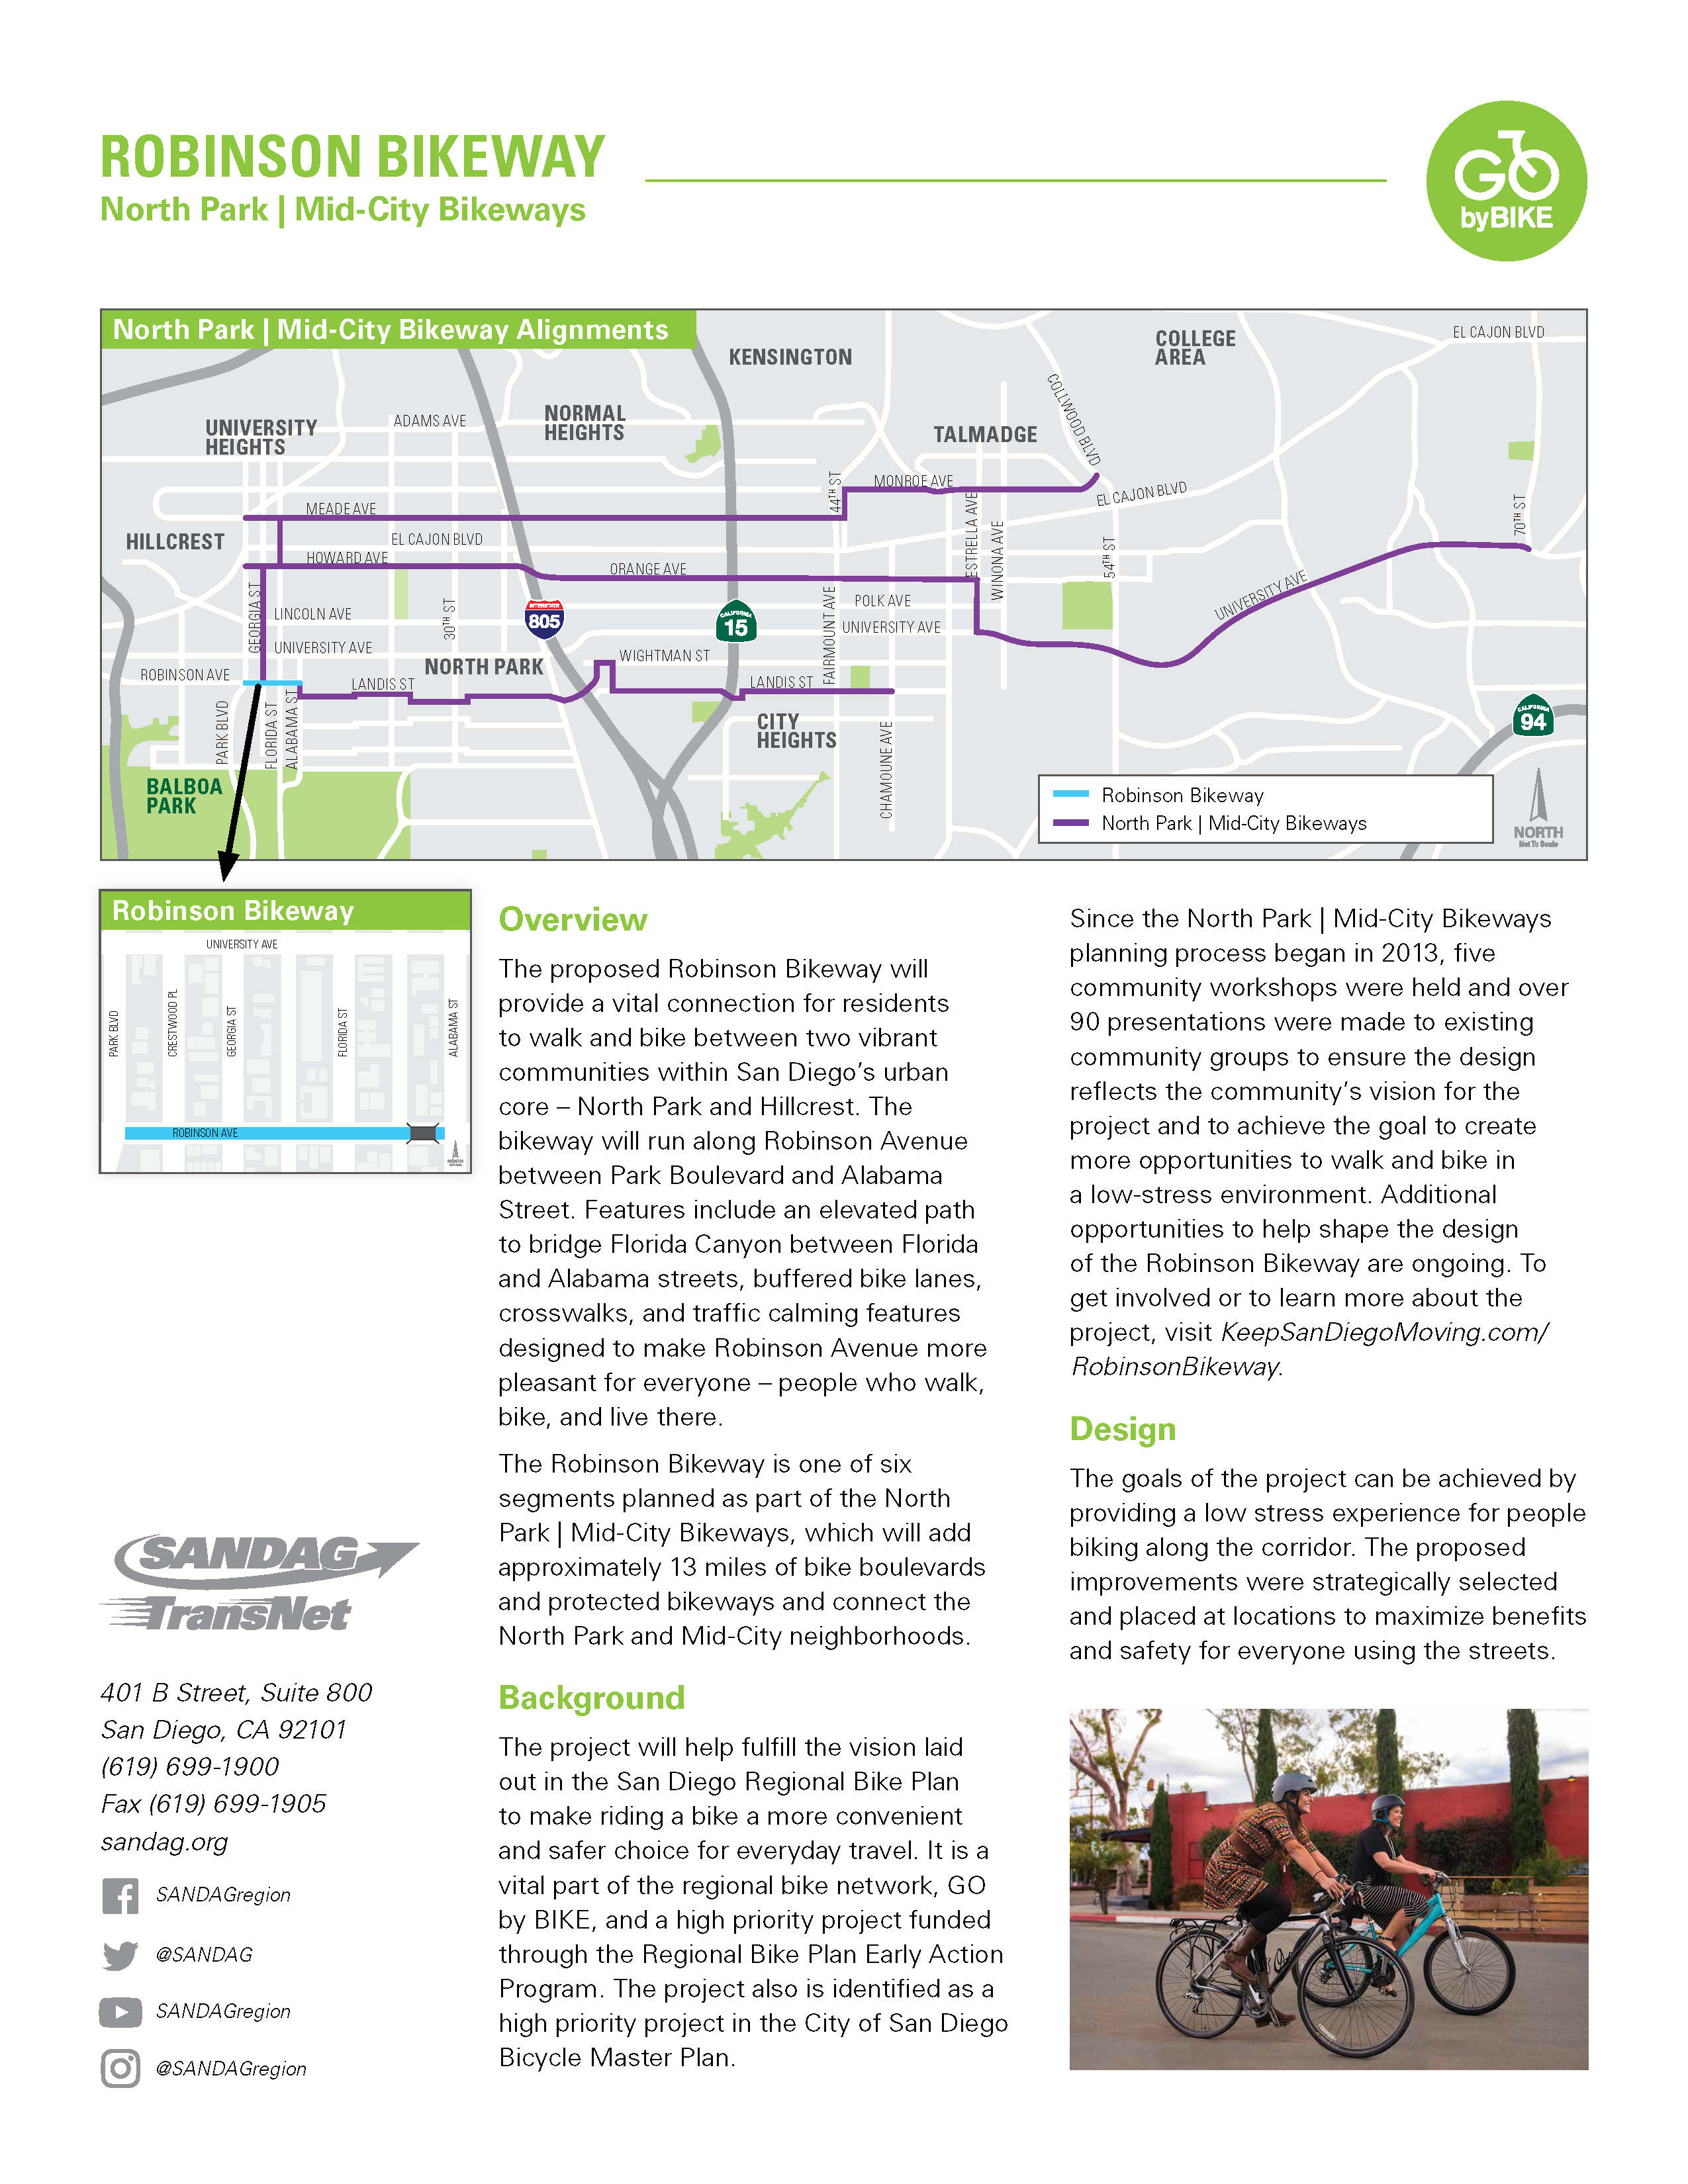 View the Robinson Bikeway project fact sheet in English.